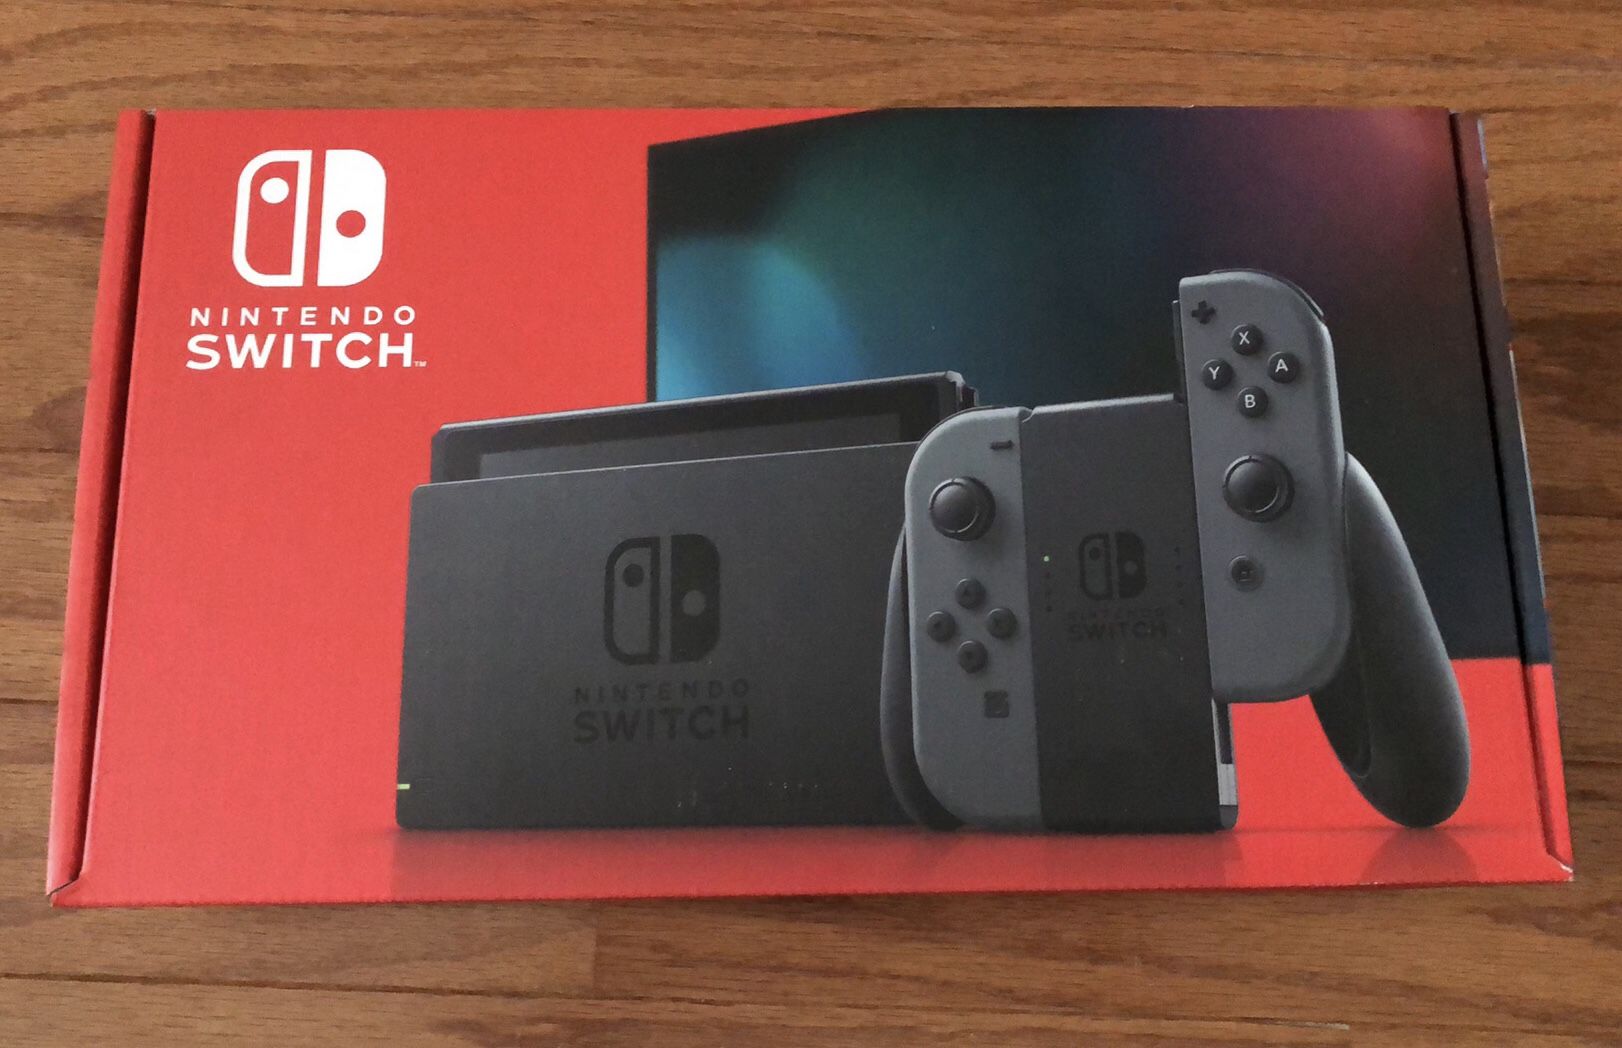 Nintendo Switch Video Game Console with Gray Joy-Con Controllers - Version 2 - Newest Model